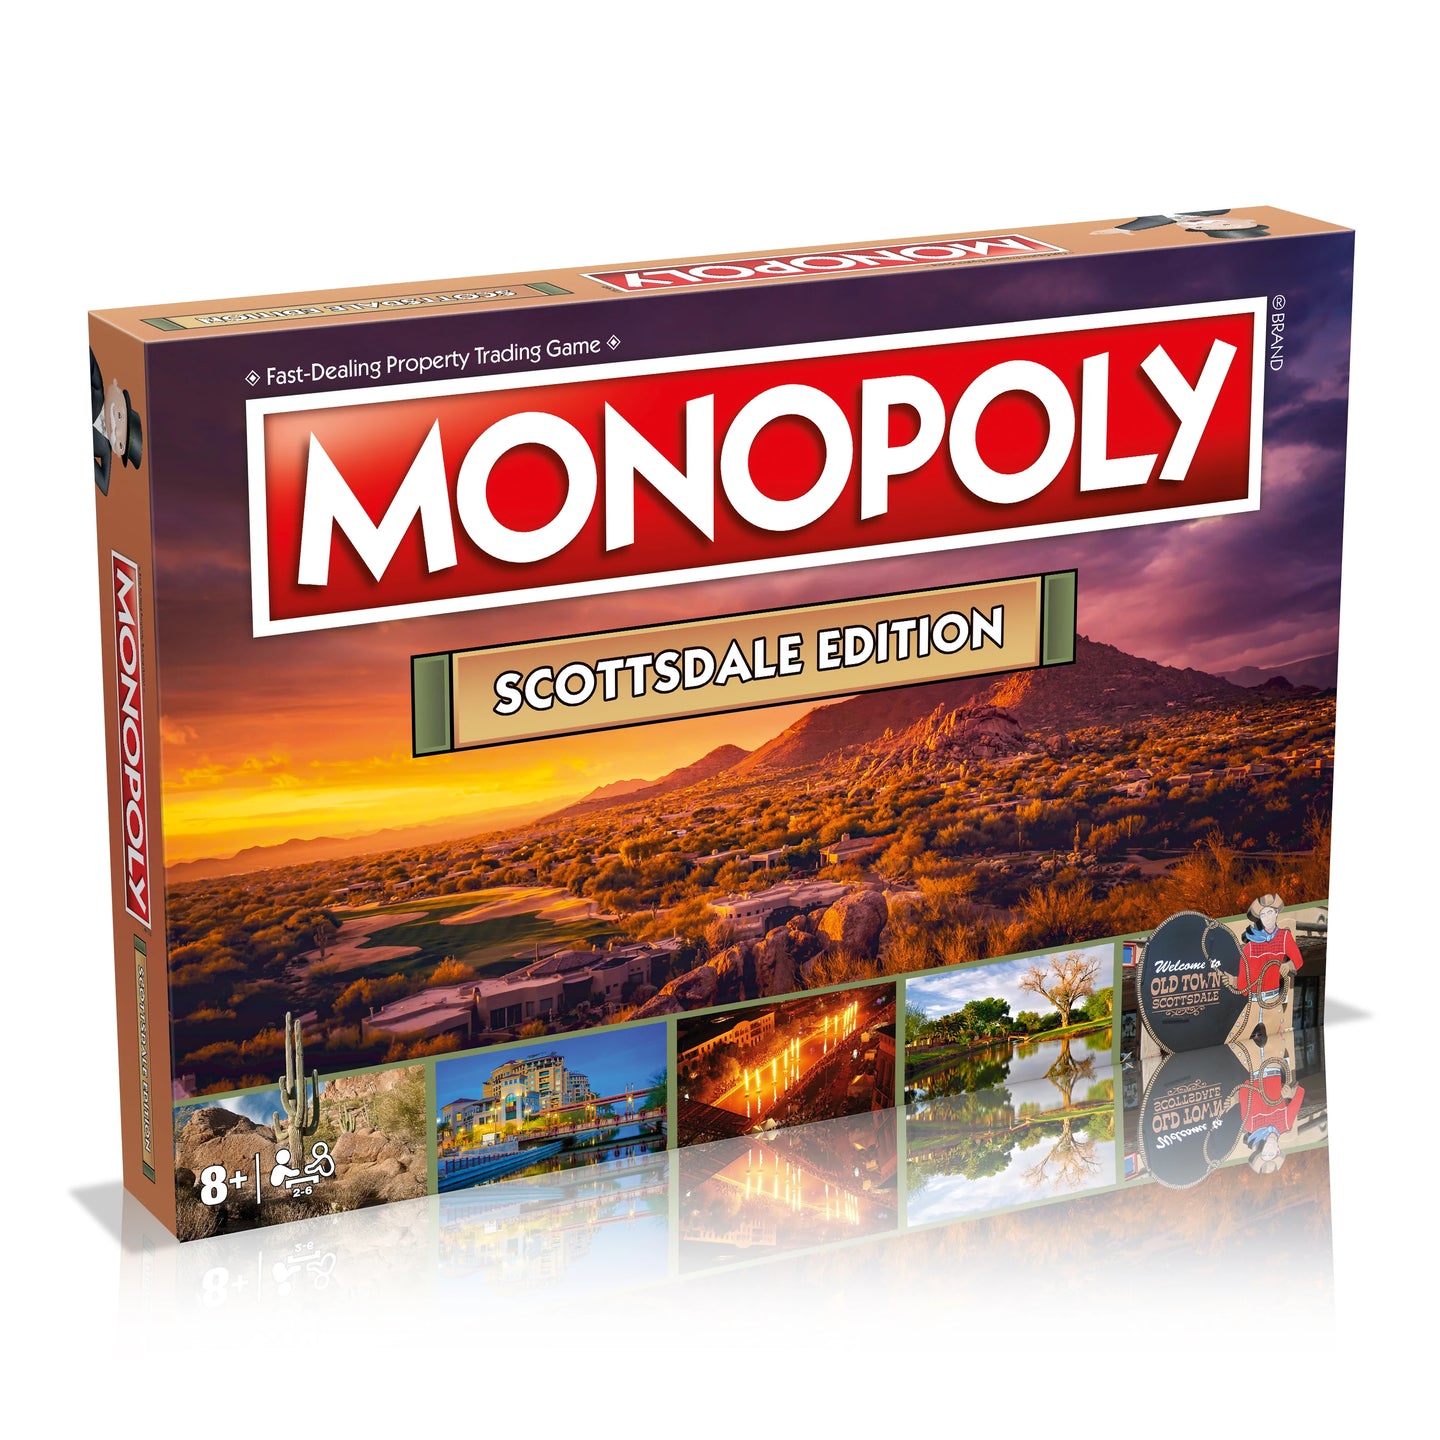 Scottsdale Edition Monopoly Board Game